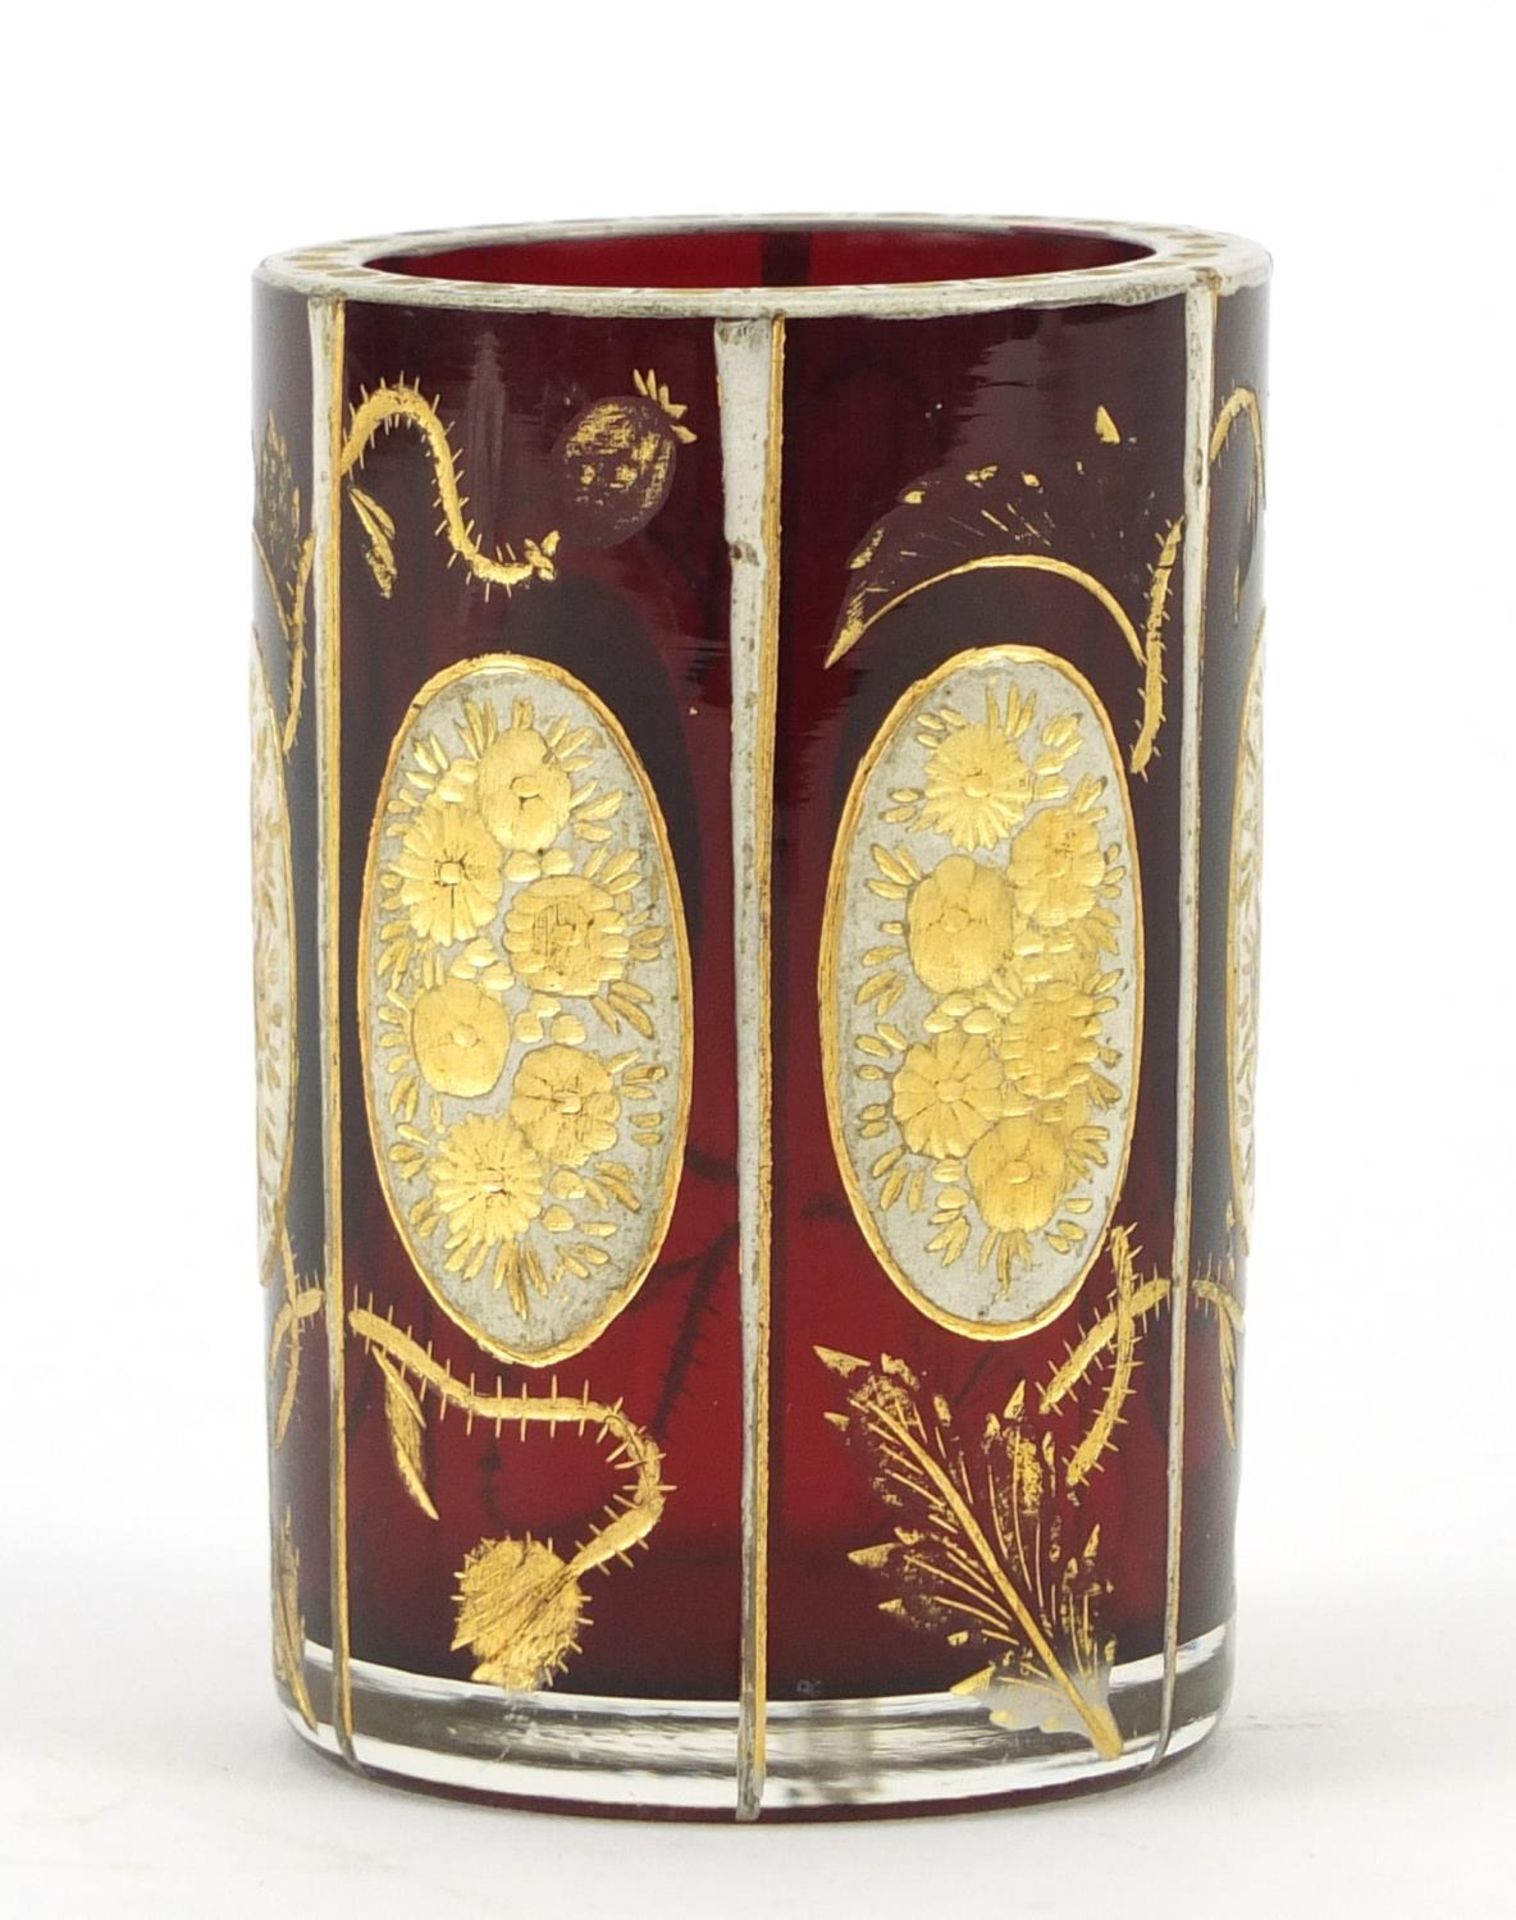 Bohemian ruby glass vase, gilded with flowers and thistles, 7.5cm high There are a few small chips - Image 4 of 8